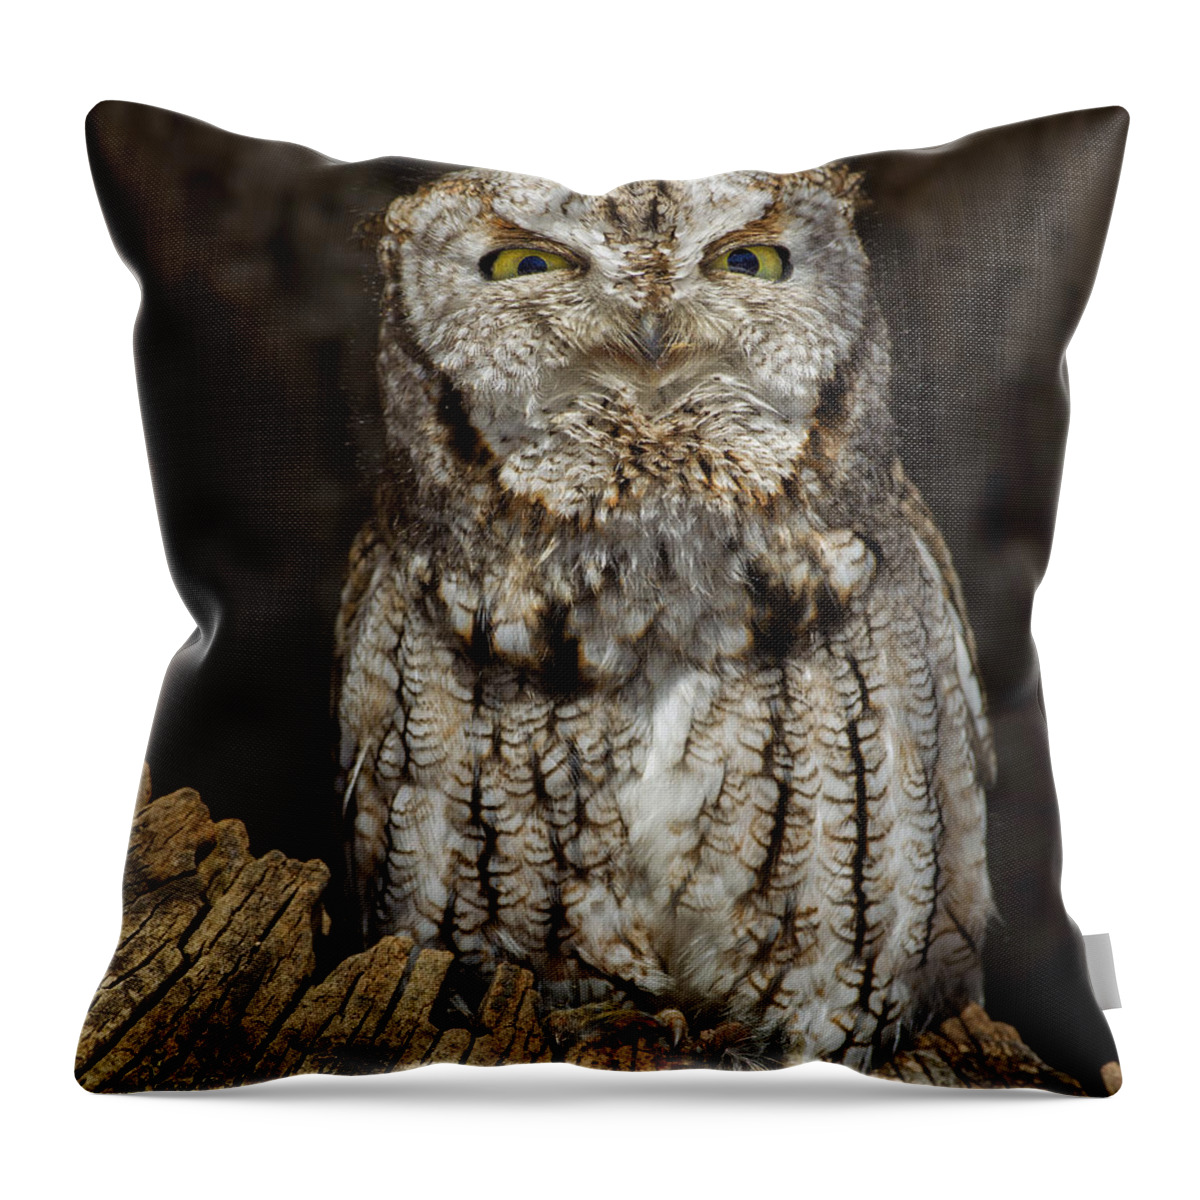 Eastern Screech Owl Throw Pillow featuring the photograph Mr Grinch by Timothy McIntyre